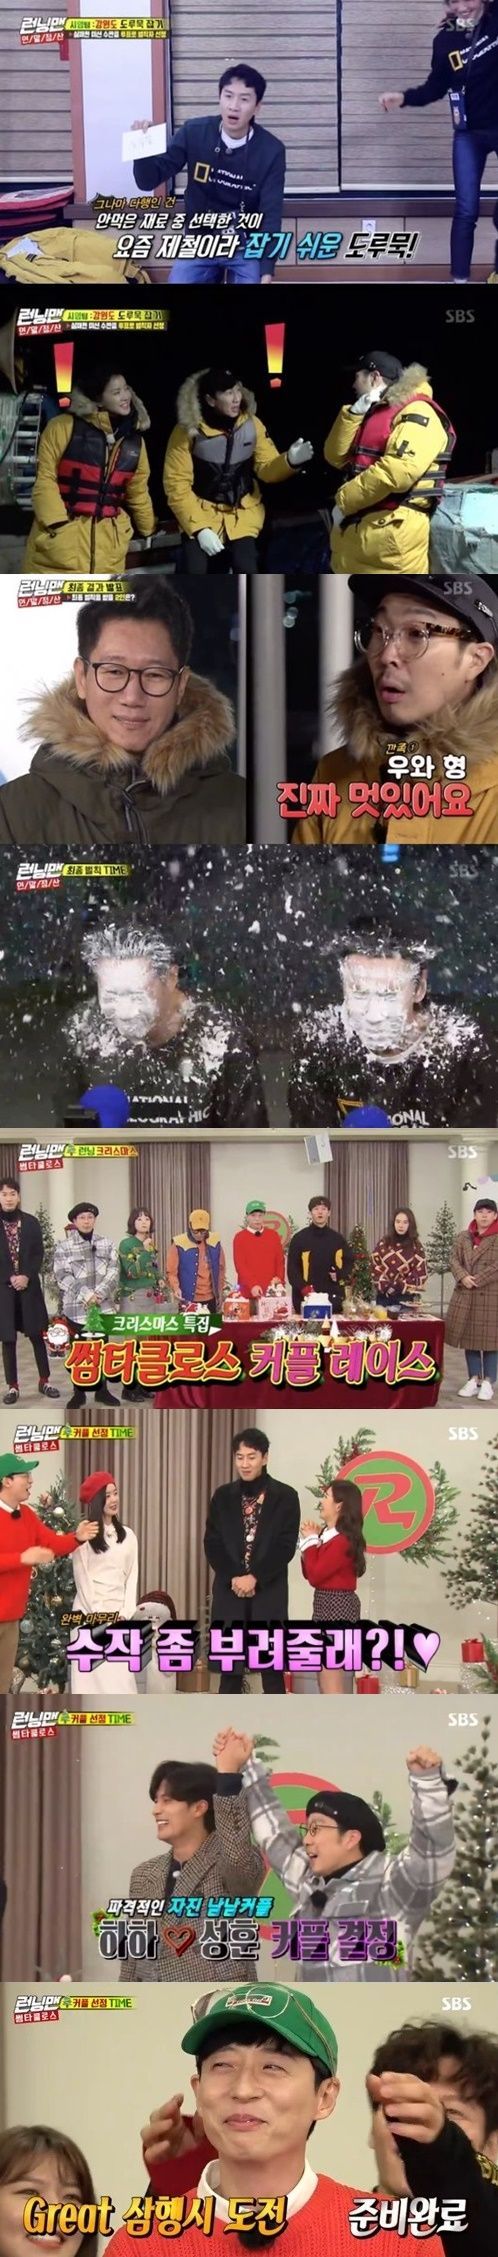 <p> Running Man comedian Yoo Jae Suk  Samshan best 1 minute.</p><p>24 viewing rate research company Nielsen Korea, according to the day before(23 days) broadcast of SBS Running Manper minute, with a maximum application rate of 8. 4%(NCR furniture viewership standard)up to climbed.</p><p>This day in the broadcast members that while progress had Global The Mission of failing The Missionrematch The Mission year-end settlement: great raceresults and big, we Featured Race: Claudia Clauspropagation boarded.</p><p>Ahead 3 team of The Mission settlement result, these options belong to the management team all The Mission to success by penalty box, I didnt have to, but vote by such number of penalty box. Whereas, before peoples team side of HellFalls in second after The Mission in Hong Kong, Chow Yun-fat and authentication shot to find thechallenge failed to necessarily the penalty box and had. This in analysis with penalties who received this light with the punishment received.</p><p>This day in the broadcast big time Featured Race: Claudia Clauswas painted. Girl swimming including Learn night, Han Sunhwa, Jeon Hye-Bin, star Hoon, singer Michael Bublé is the most delightful couples the start of the race. Especially, Han Sunhwa is opening early couple selectionin Yoo Jae Suk on Samshan humiliationif the situation is reversed No Way Back Couple selection, Yoo Jae Suk in the Samshan, the station needs to down price progress.</p><p>Members by the legs until all the glasses up take off the old Yoo Jae Suk is as soon as the Han Sunhwa, Narcissus seeds, why now? Angry!Called Samshan presented and, finally, Han Sunhwa and couples. This scene is per minute, with a maximum application rate of 8. 4%for the best 1 minute.</p>